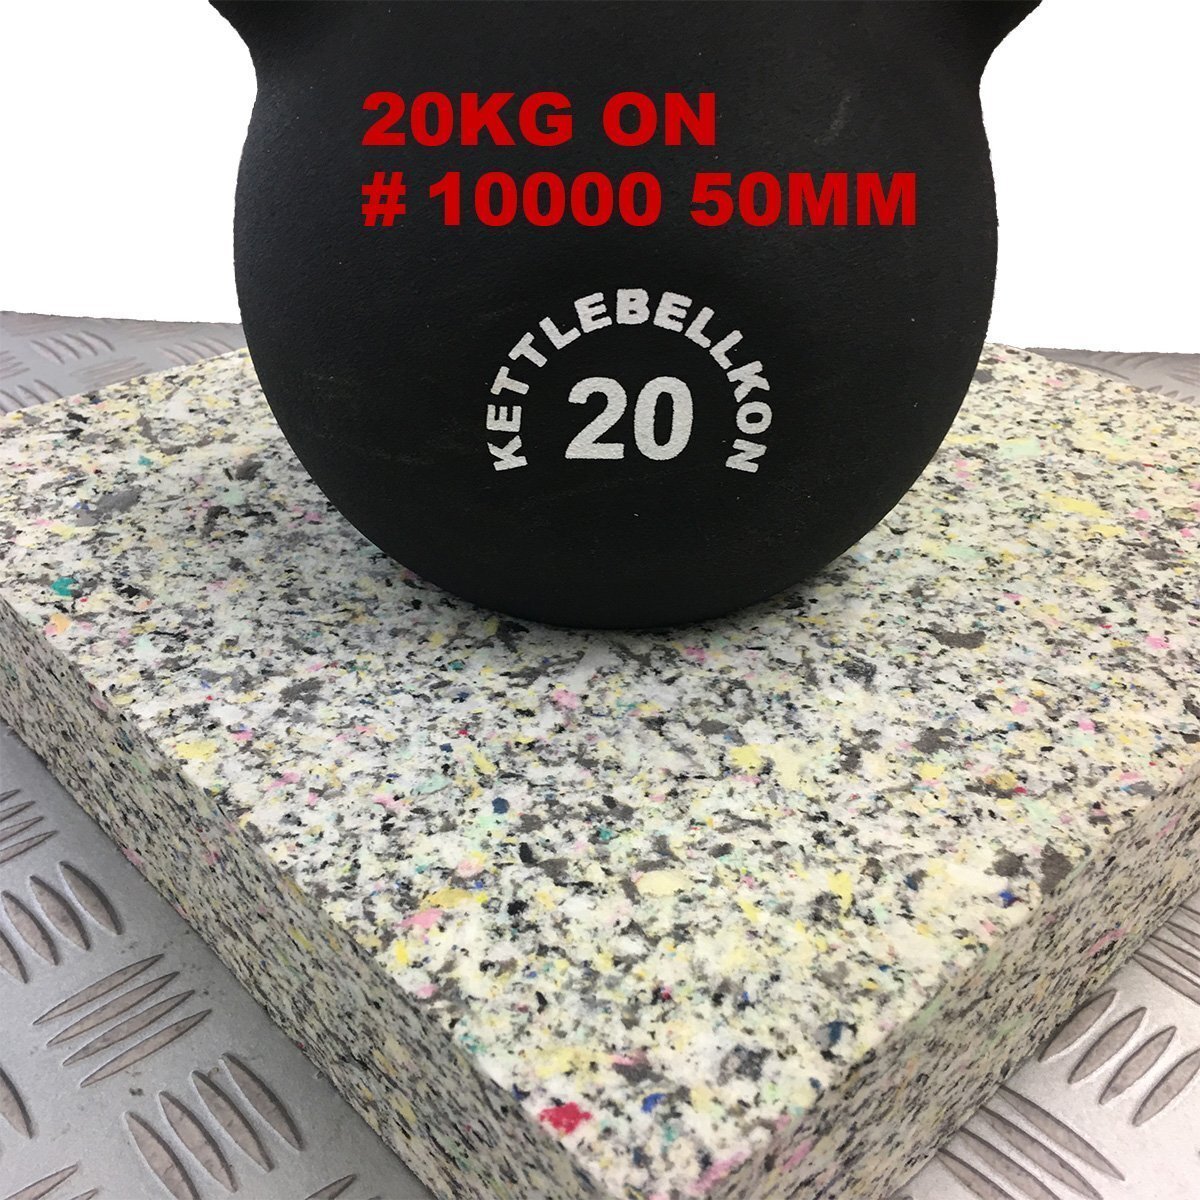  chip urethane [#10000 hardness Special .]1200x2000mm[ thickness 15mm] seat repair / sleeping area in the vehicle for bed / camper / deadning /